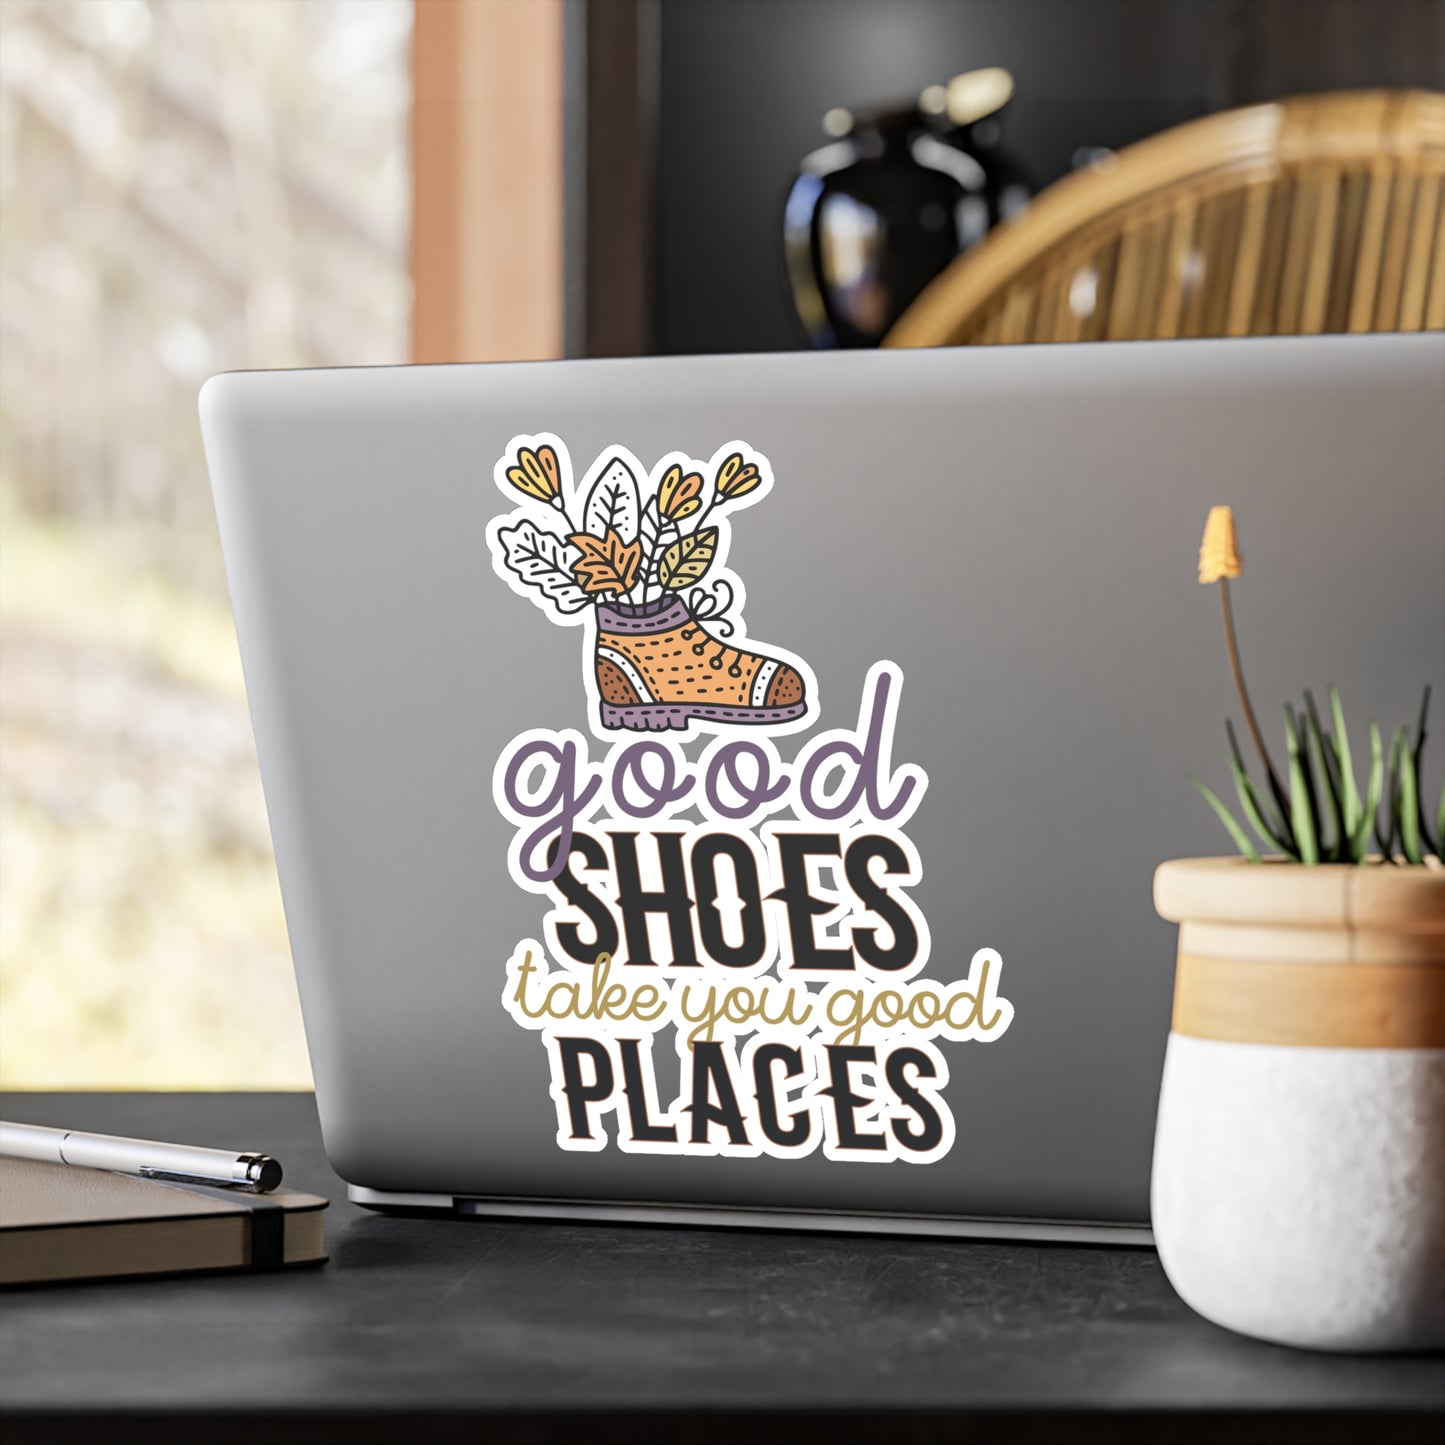 Good Shoes Take You Good Places Sticker - Motivational Treats